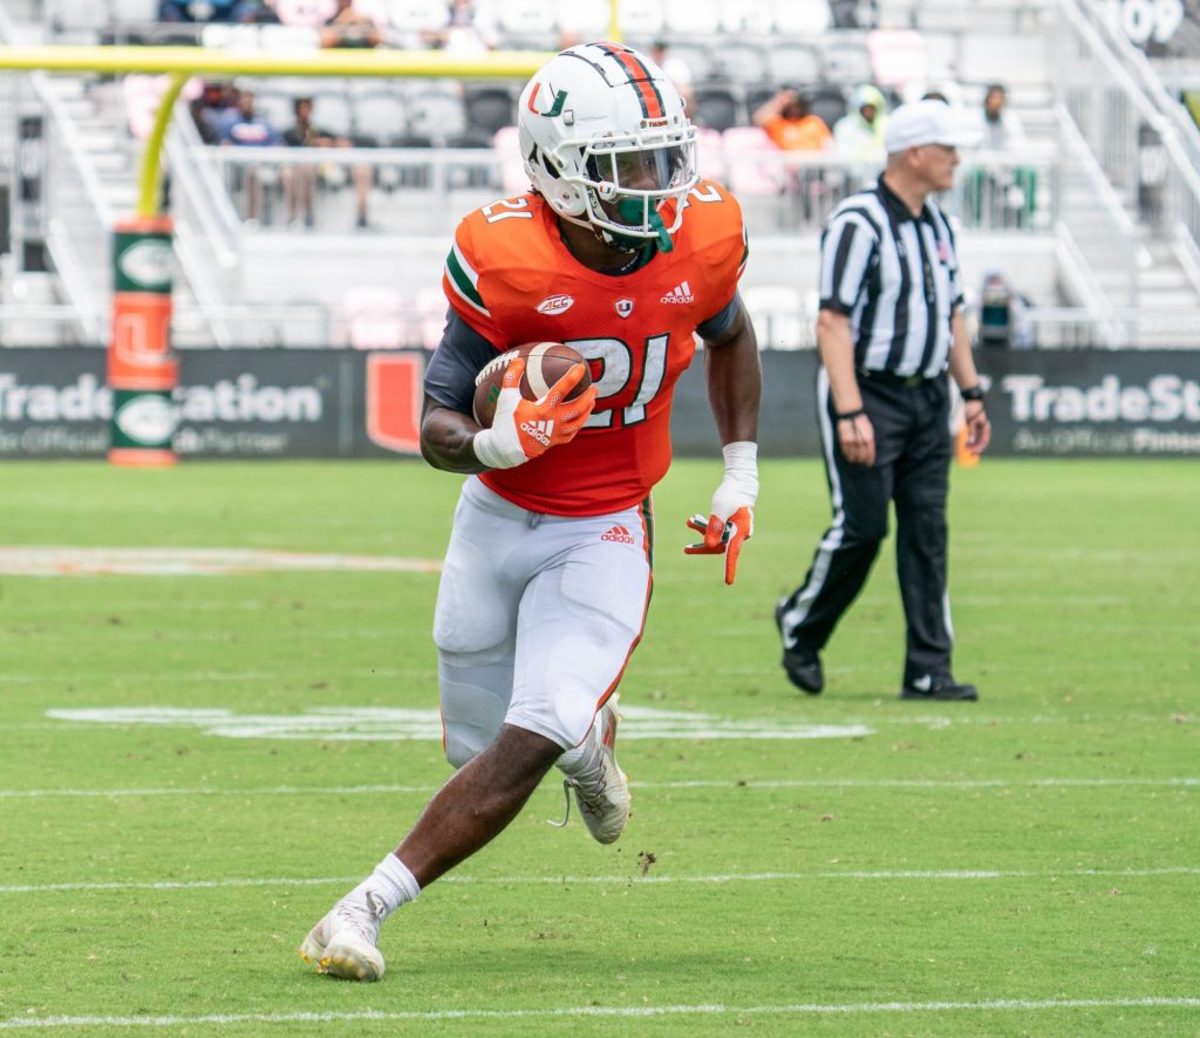 Third-year sophomore Henry Parrish Jr. looking comfortable with Hurricanes in spring game.